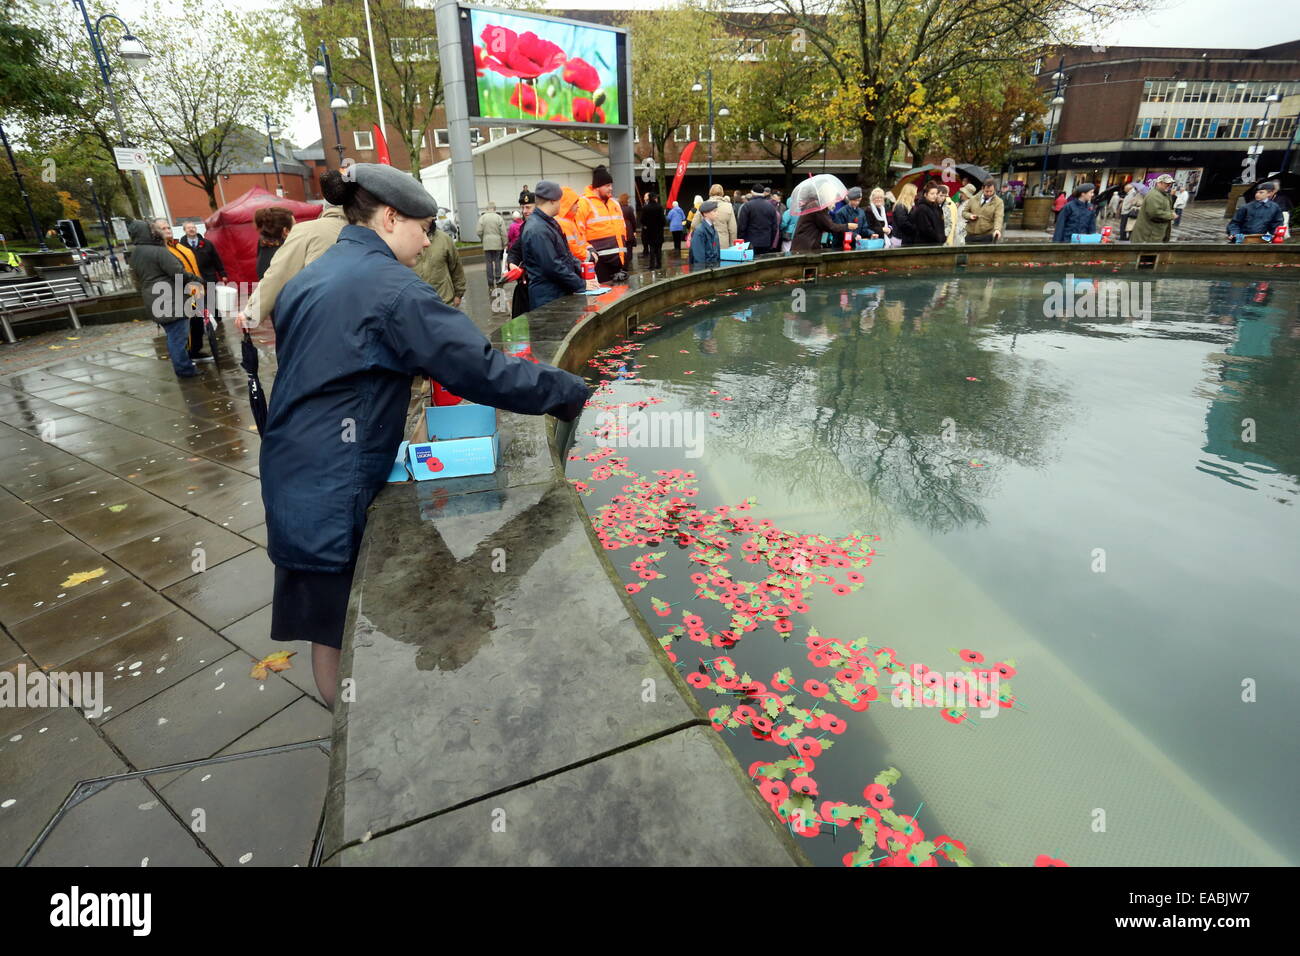 Swansea UK. Tuesday 11 November 2014  Pictured: A young female cadet throws poppies into the fountain.  Re: Armistice Day observed at Castle Square Gardens, Swansea south Wales, UK Credit:  D Legakis/Alamy Live News Stock Photo